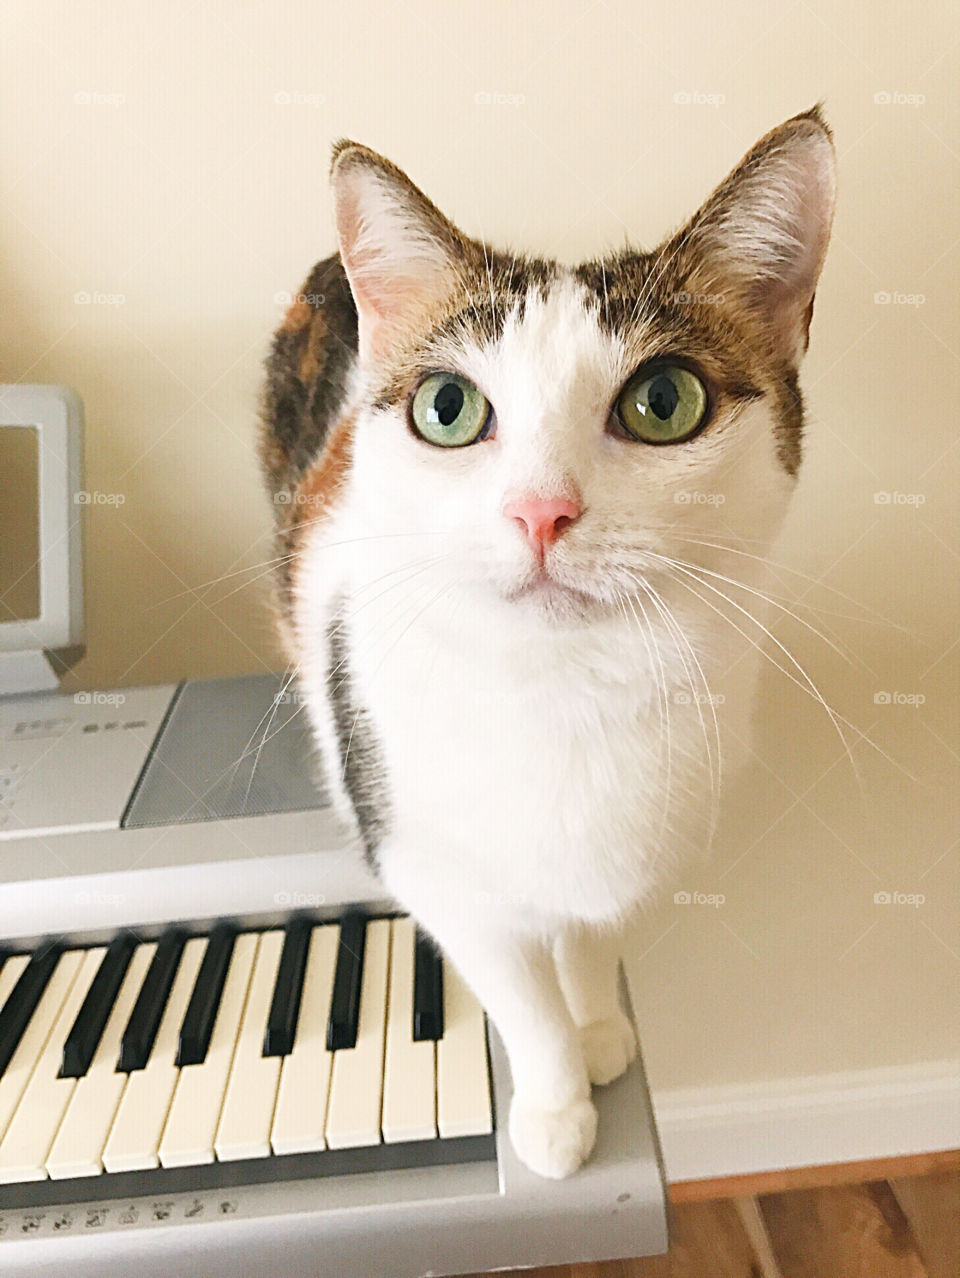 Calico cat looks at you while standing on piano keyboard